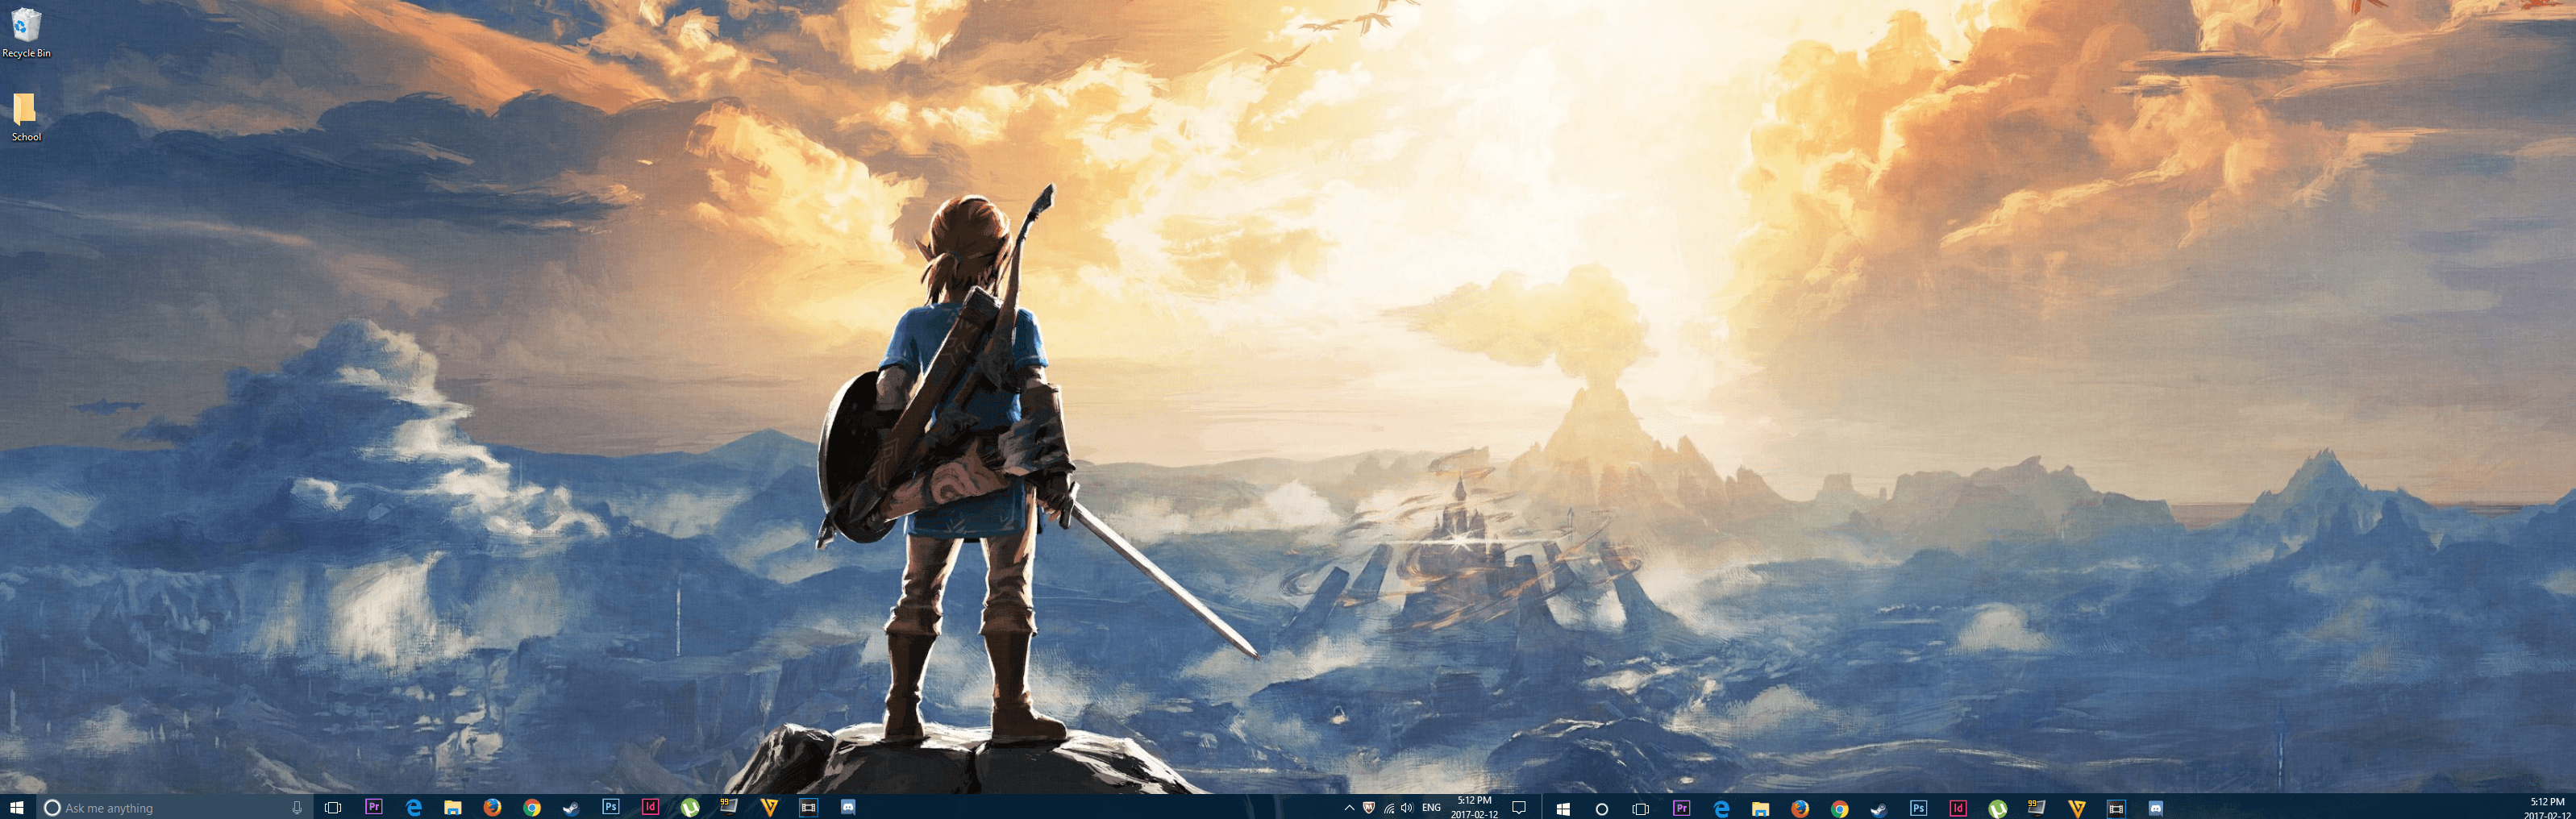 Two Monitor Wallpaper